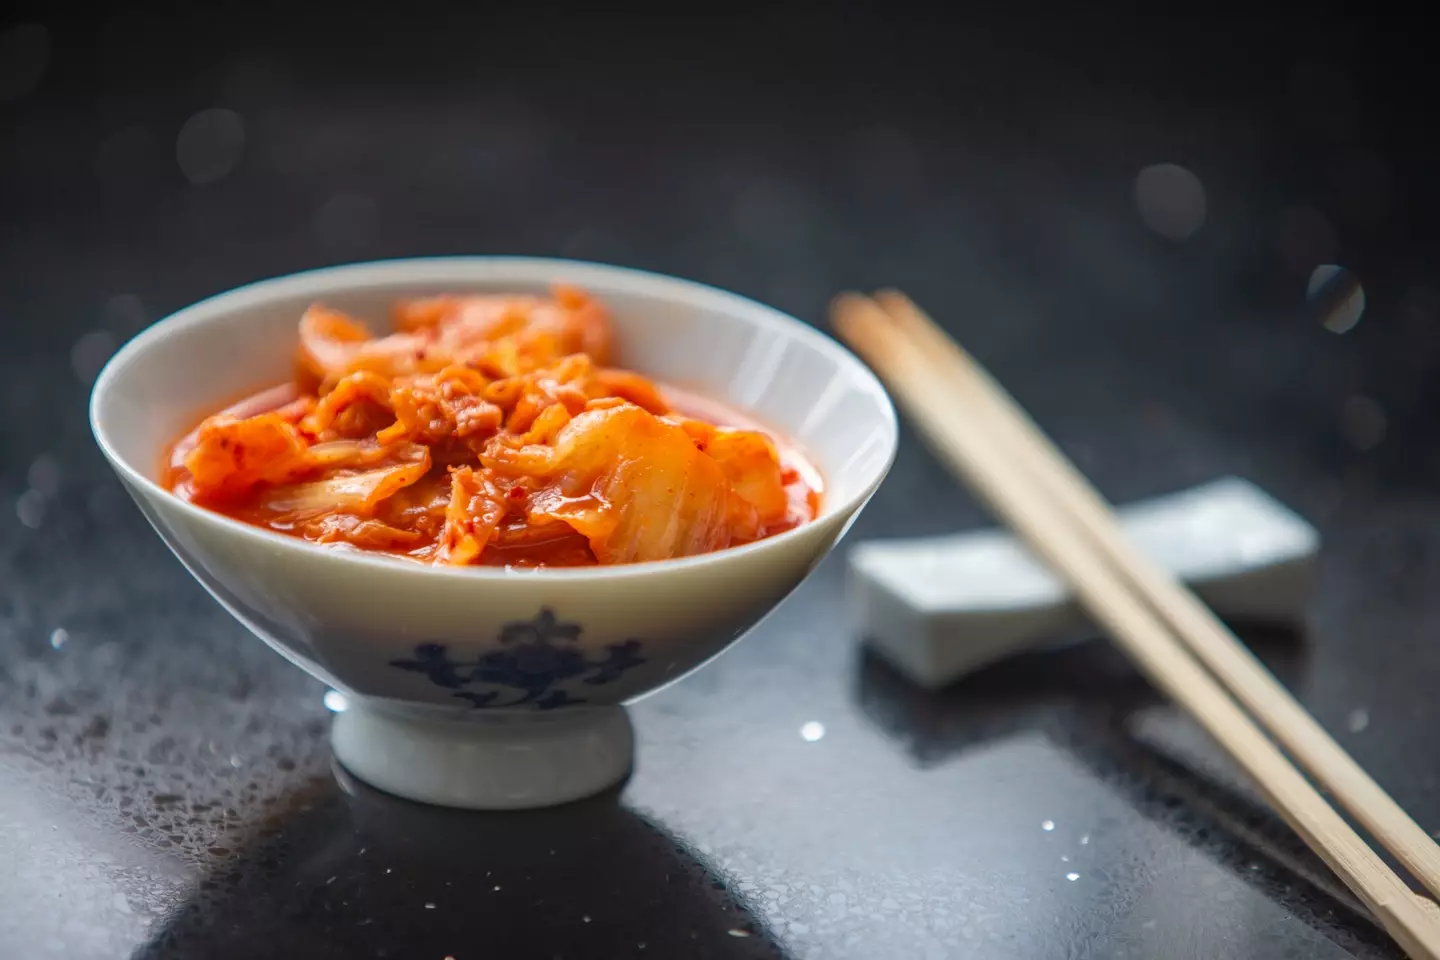 A bowl of kimchi could help with your hangovers, according to the expert.